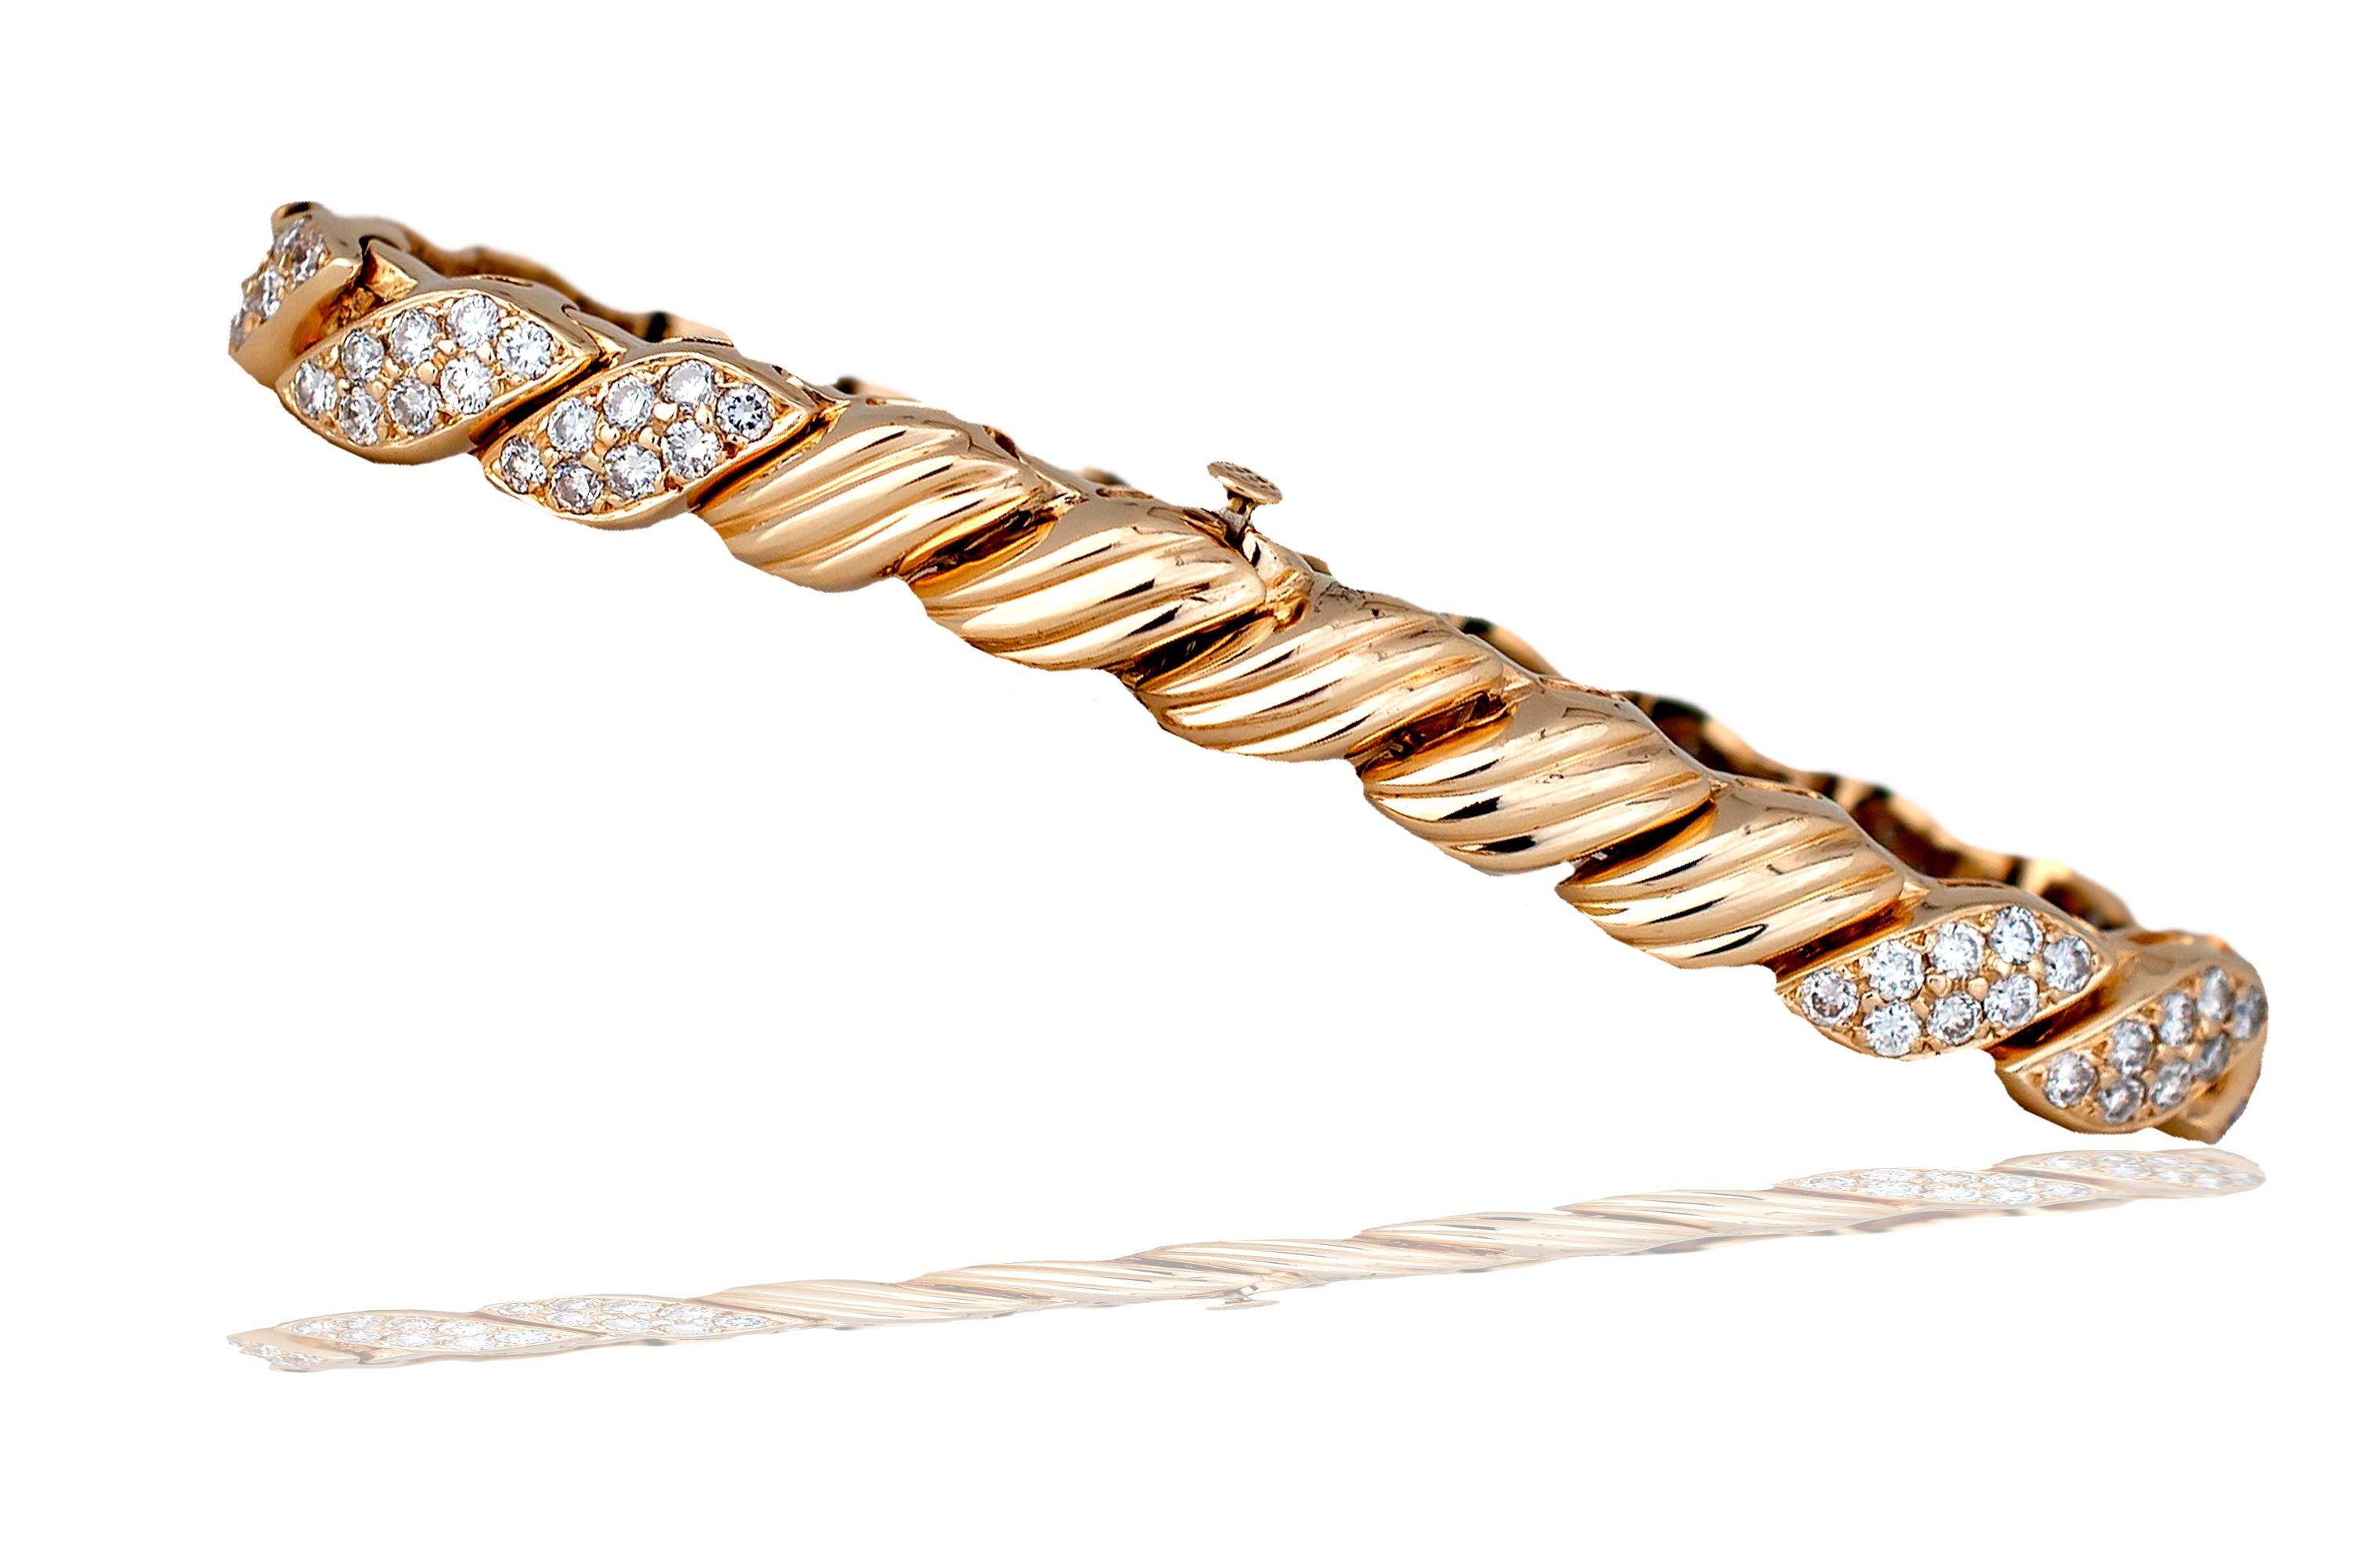 This stunning bracelet has a classic look and gives the wearer a bright appearance when seen in the light.  The bracelet is cast from 14k yellow gold  and weighs 29.2 grams.  The bracelet has stations of nine round brilliant diamonds mounted in